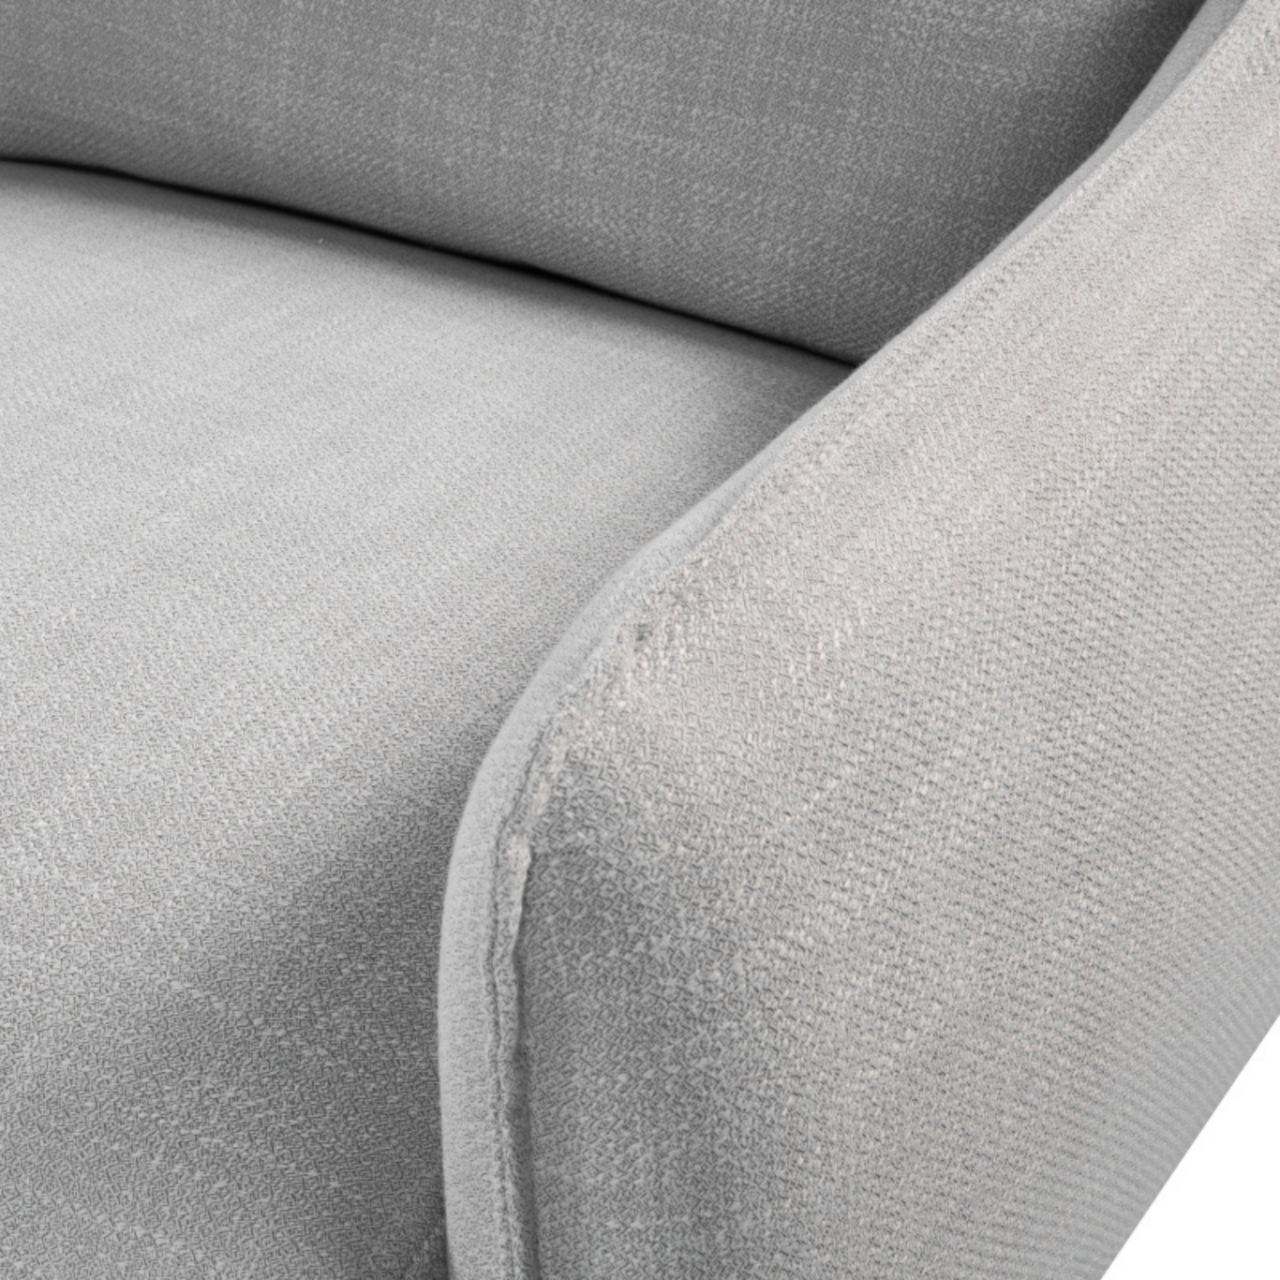 detail view of Simple, modern 2 seater sofa upholstered in grey linen fabric